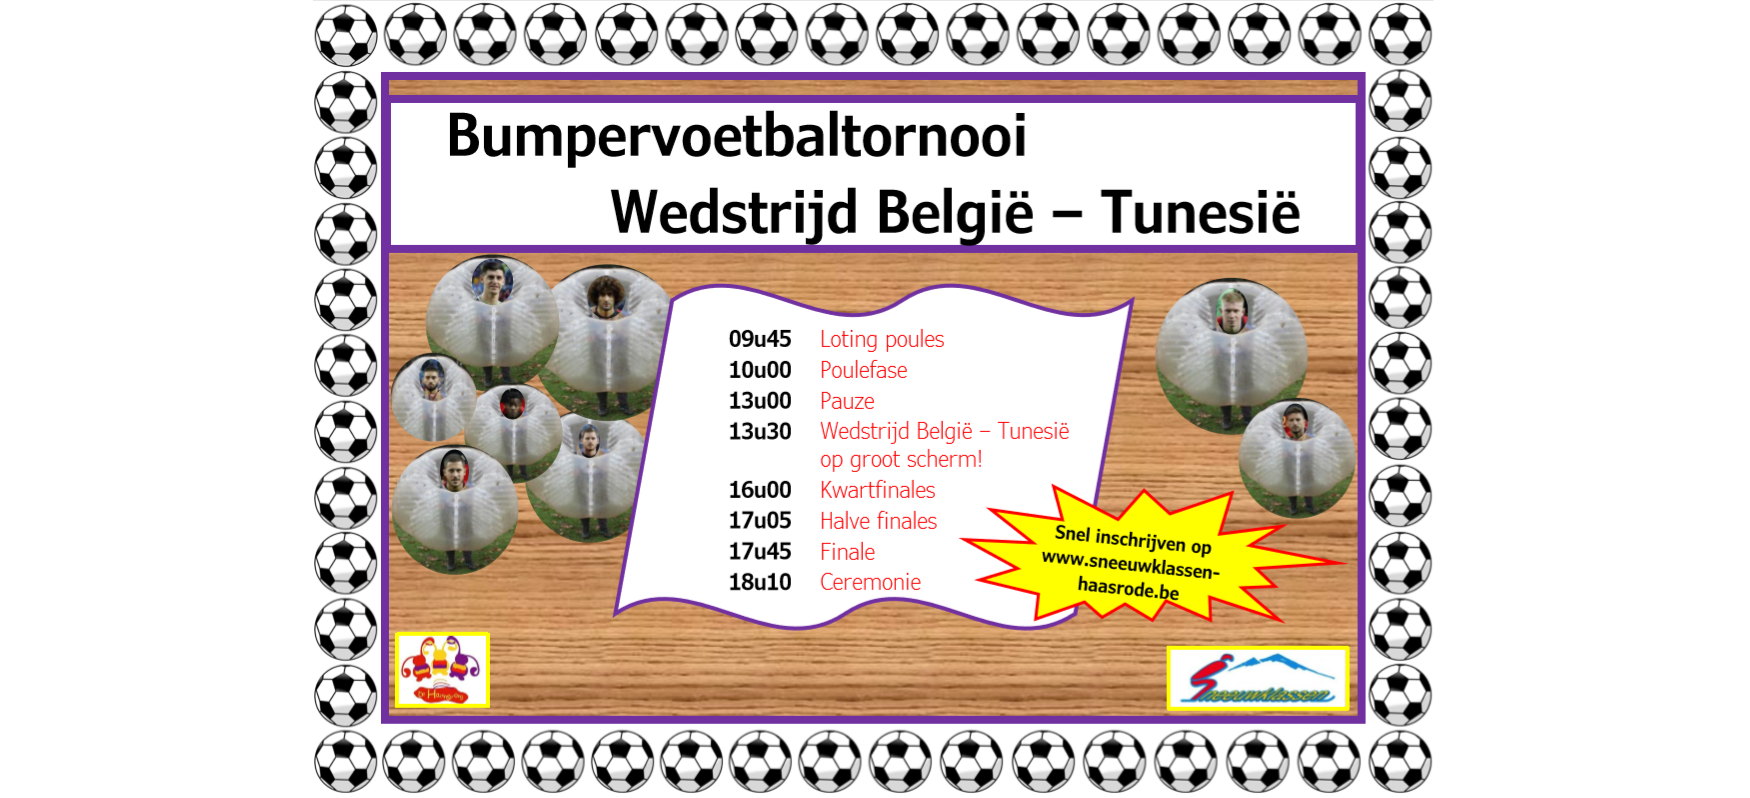 Bubble voetbal tornooi 2018